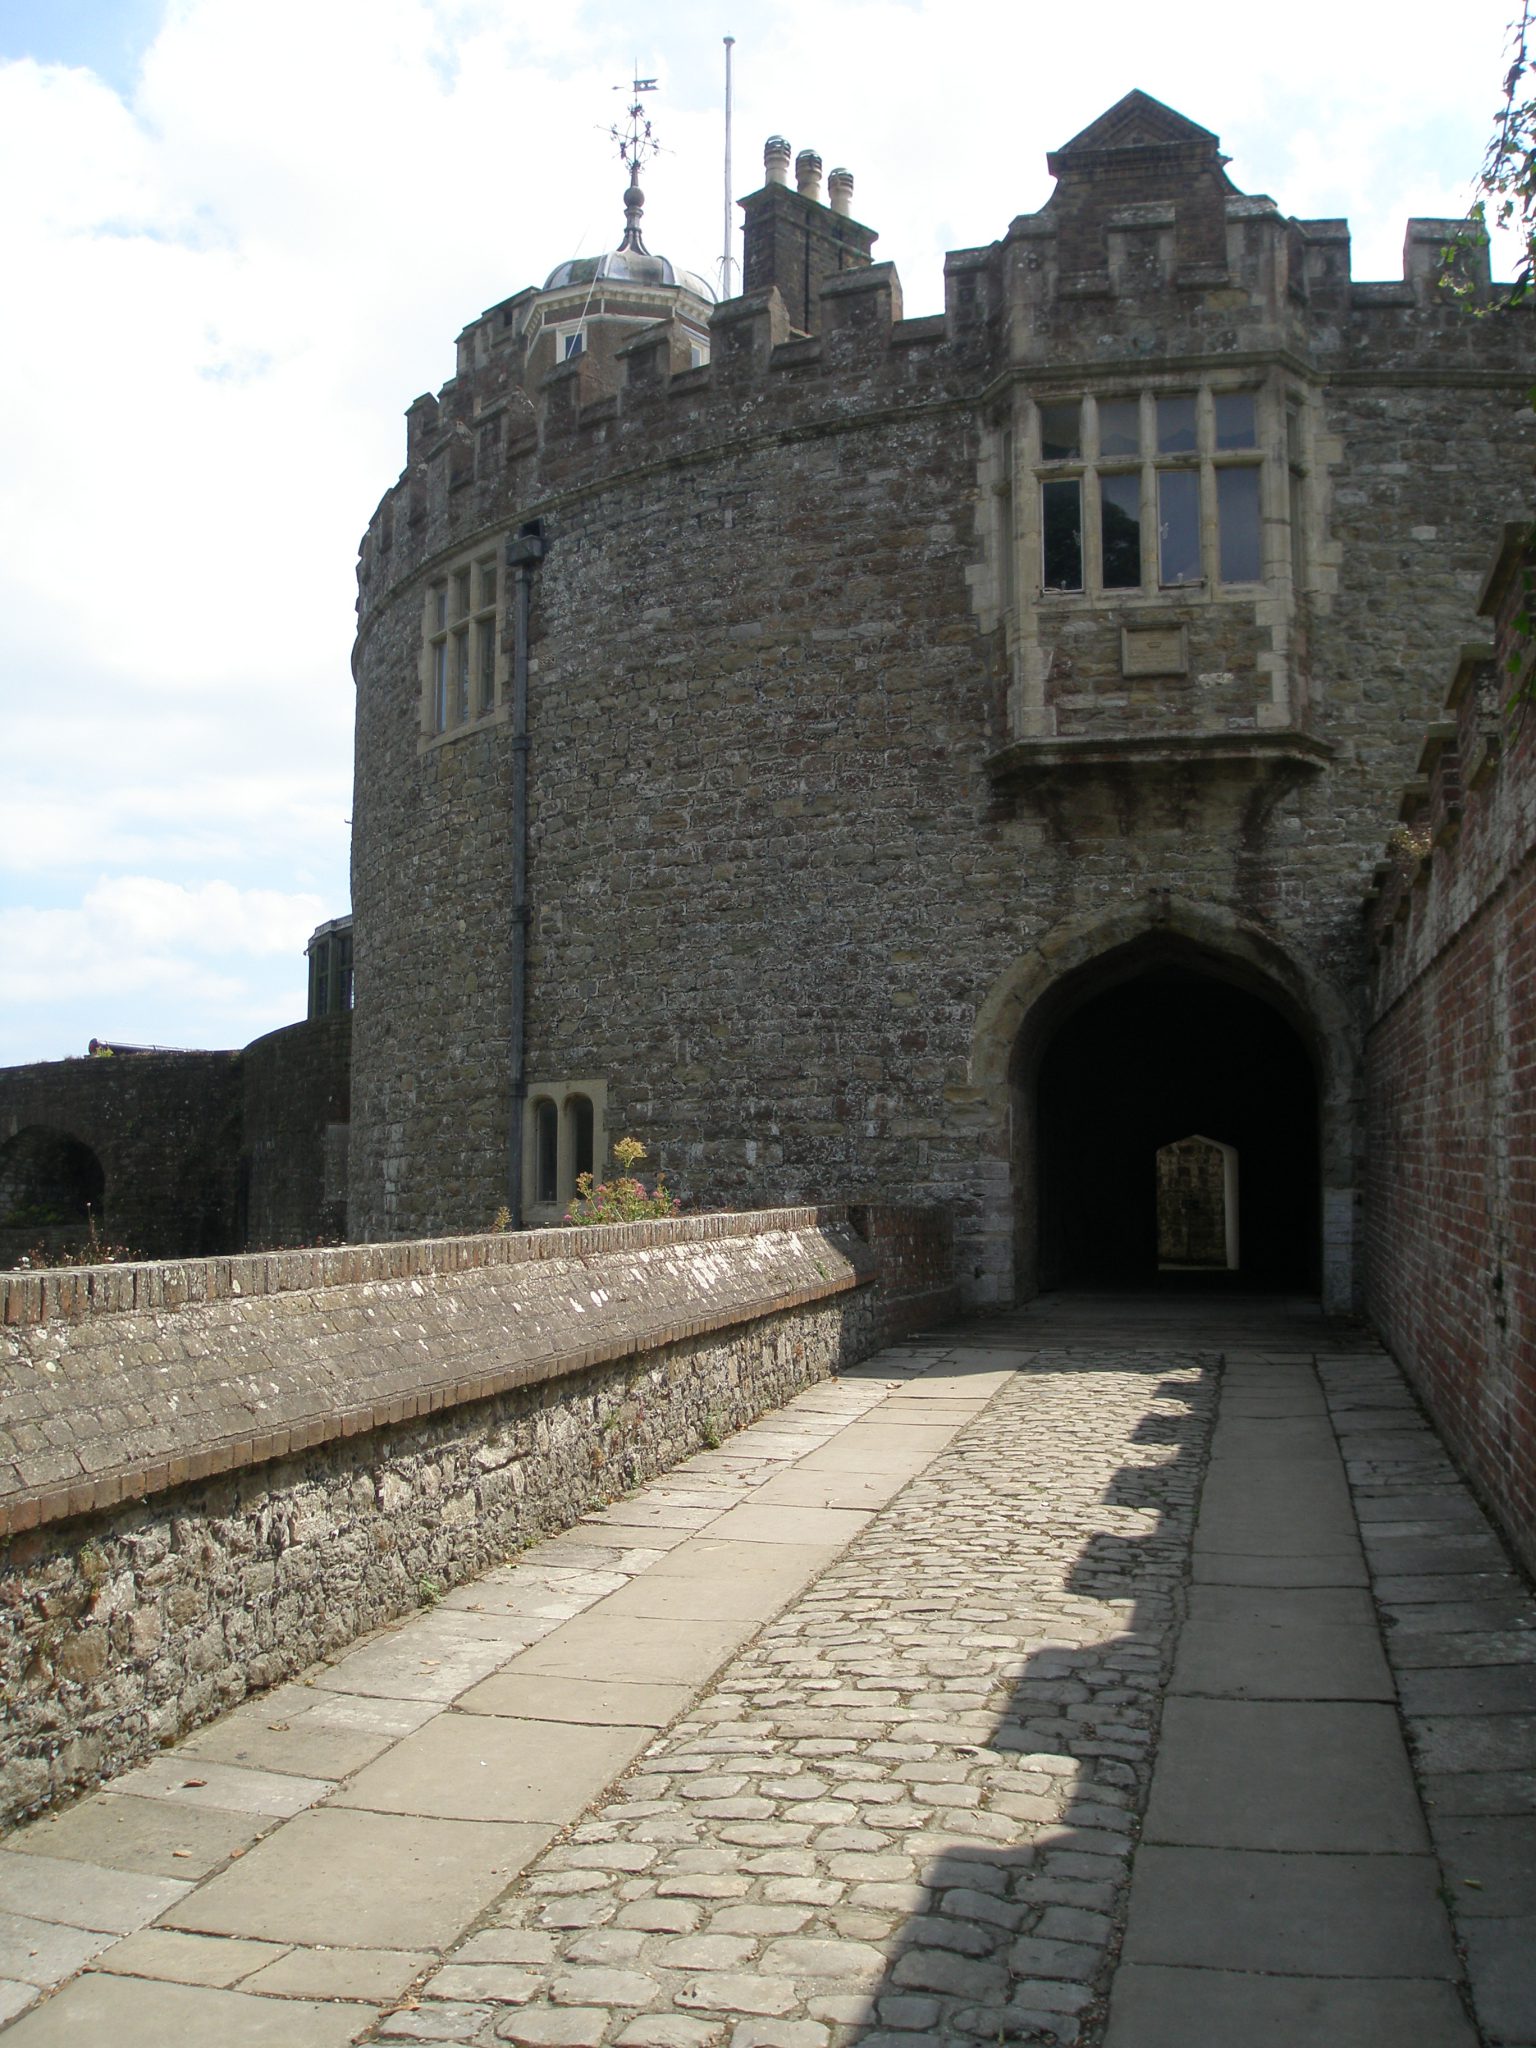 We crossed the Entry Bridge, and headed toward the Gatehouse.